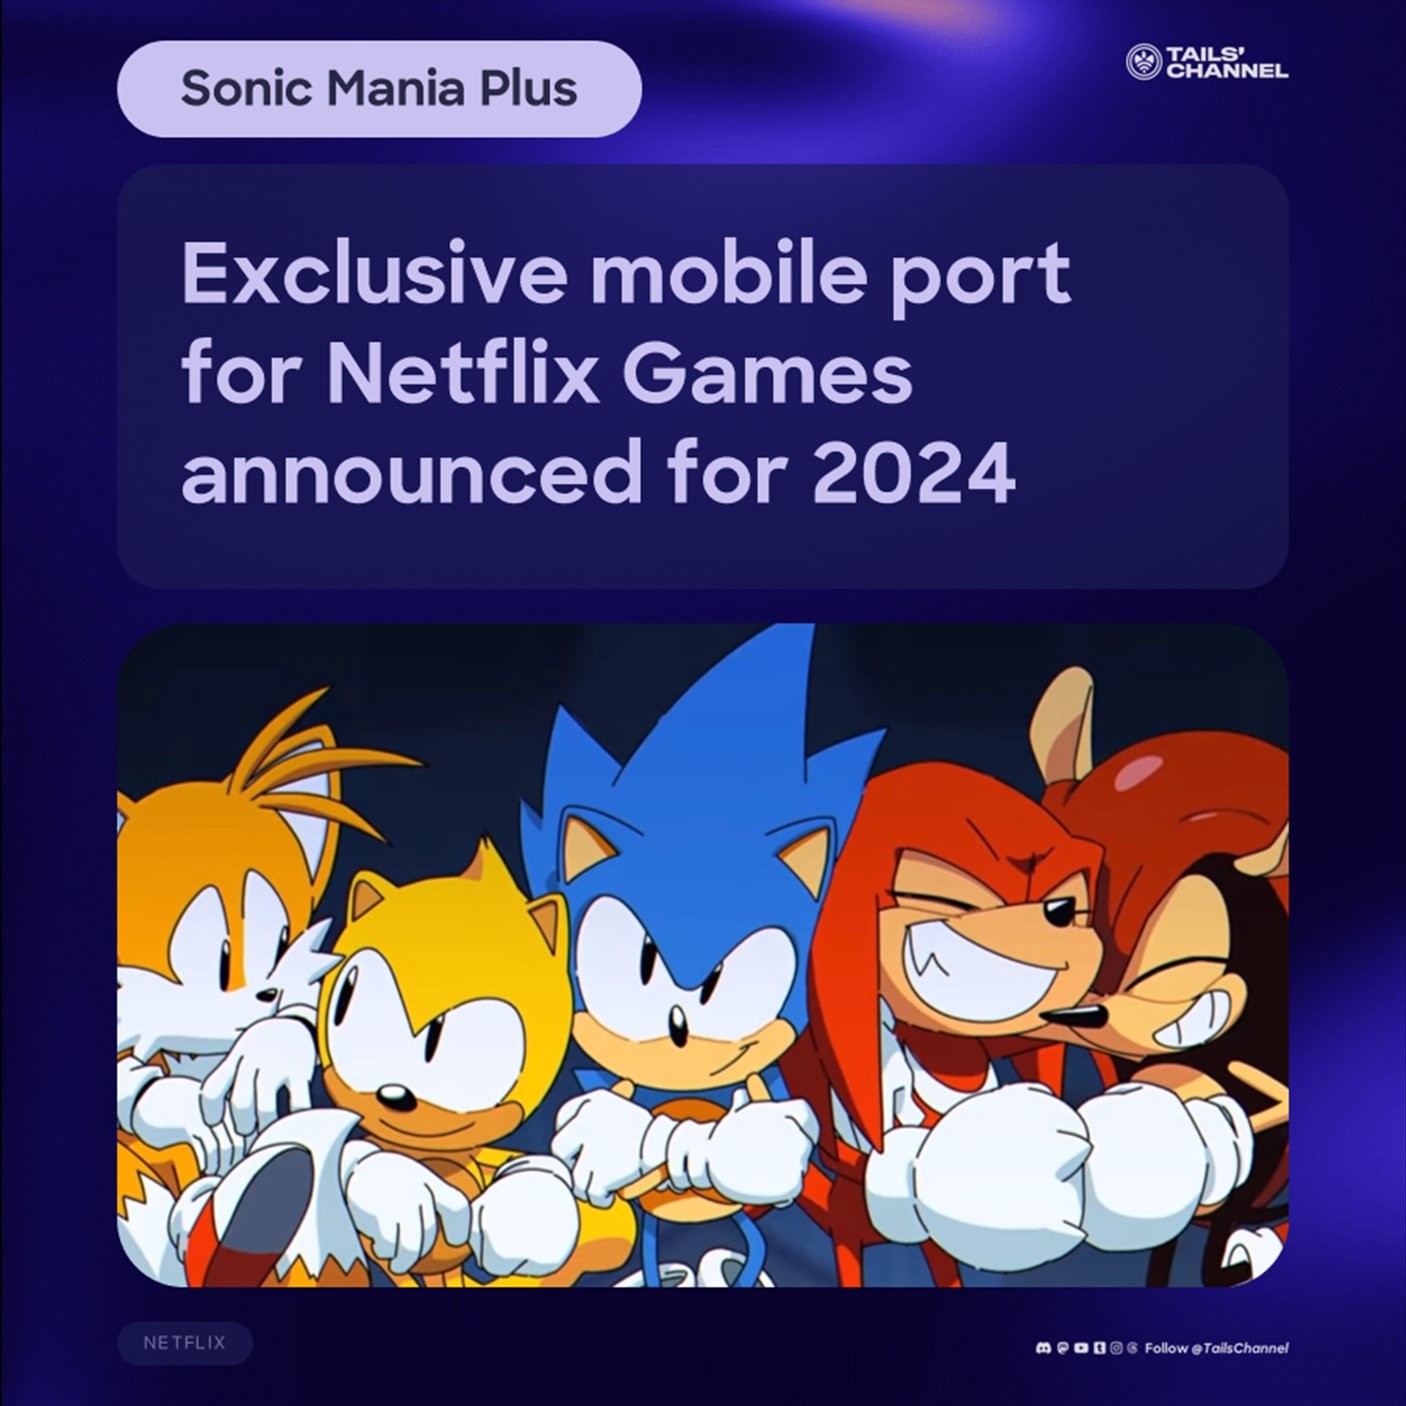 Netflix is bringing Sonic Mania Plus to your mobile